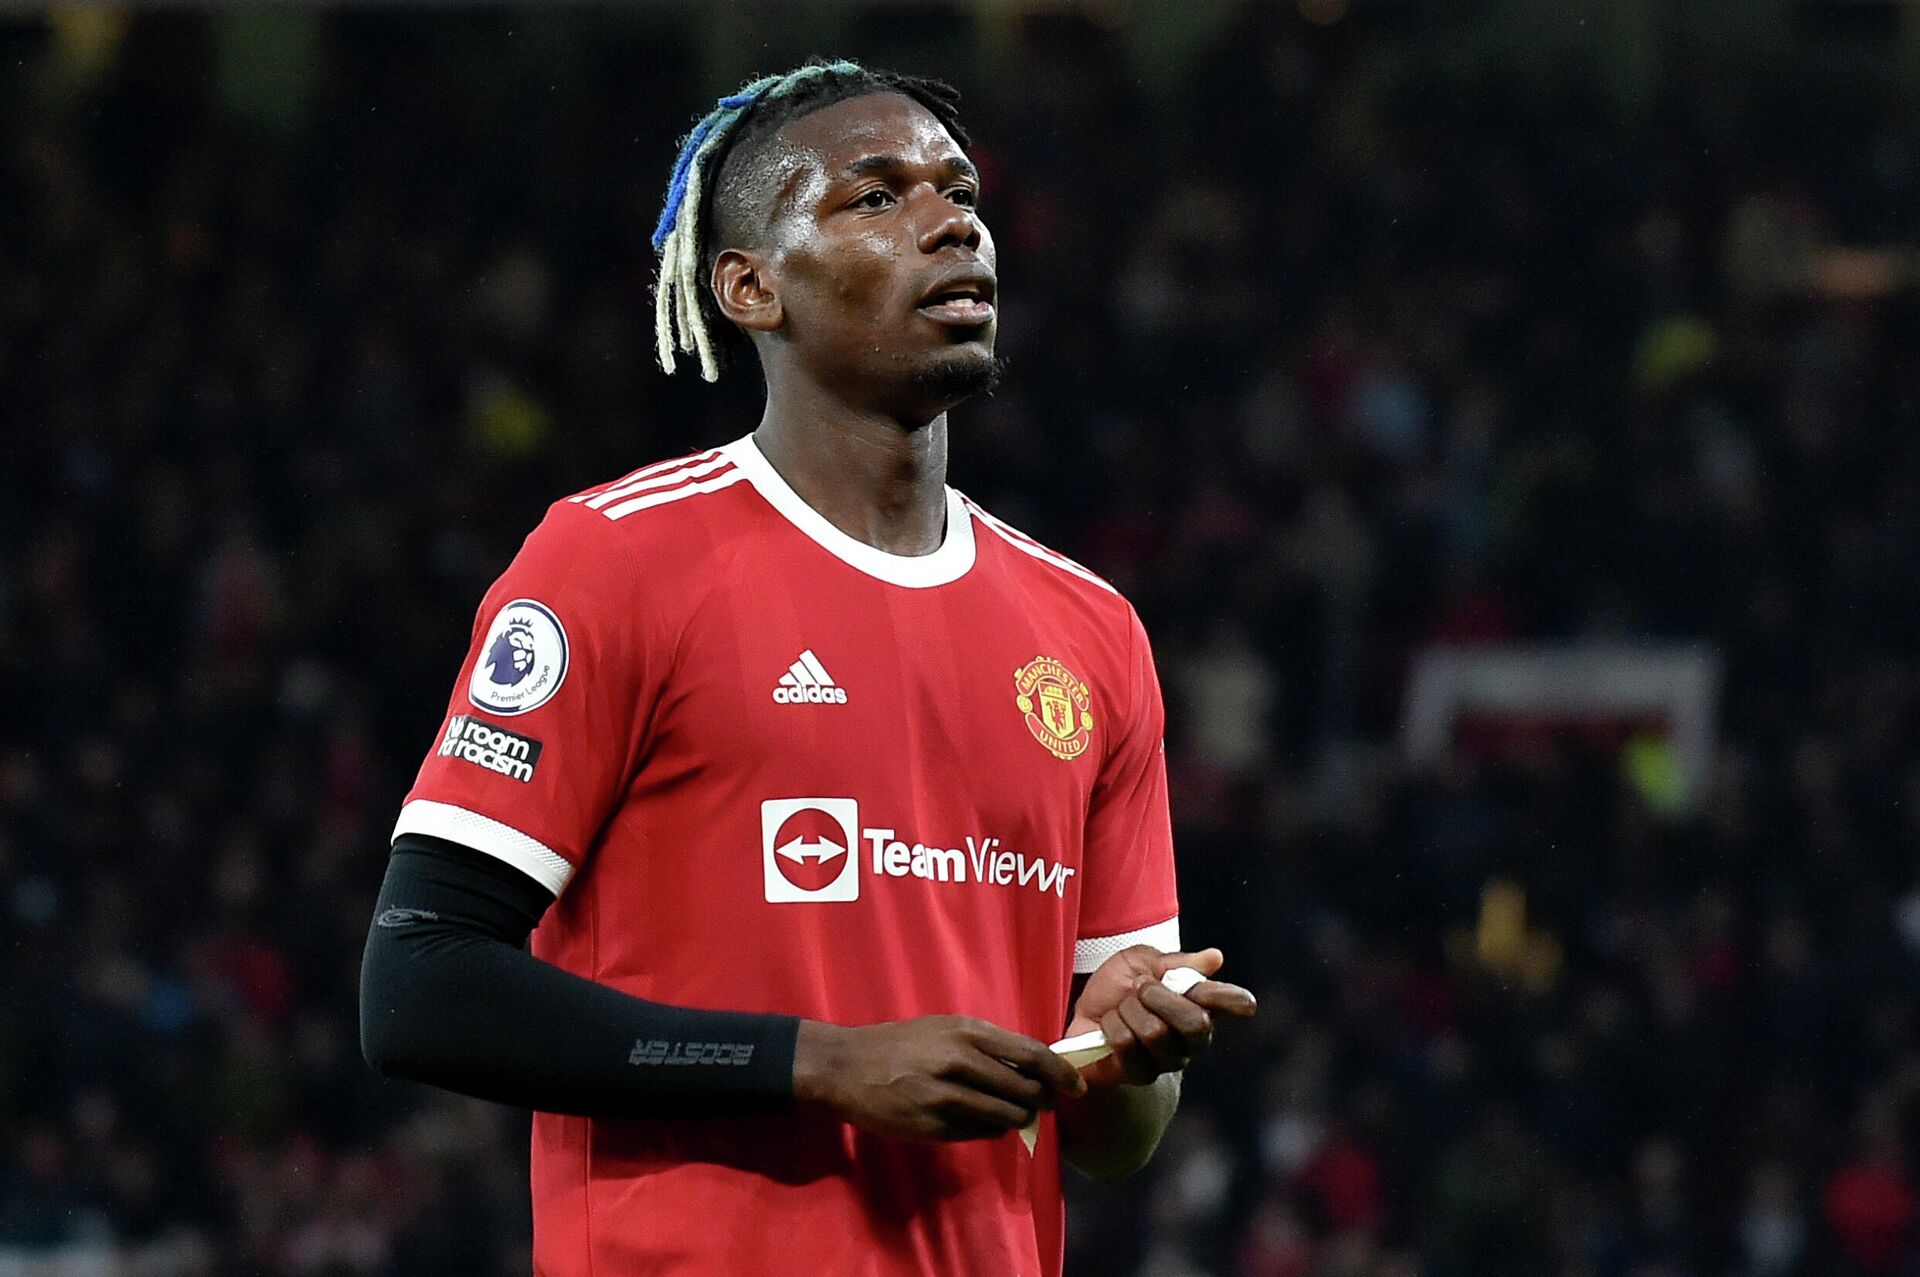 Manchester United's Paul Pogba leaves the pitch after being shown a red card during the English Premier League soccer match between Manchester United and Liverpool at Old Trafford in Manchester, England, Sunday, Oct. 24, 2021 - Sputnik International, 1920, 23.02.2022